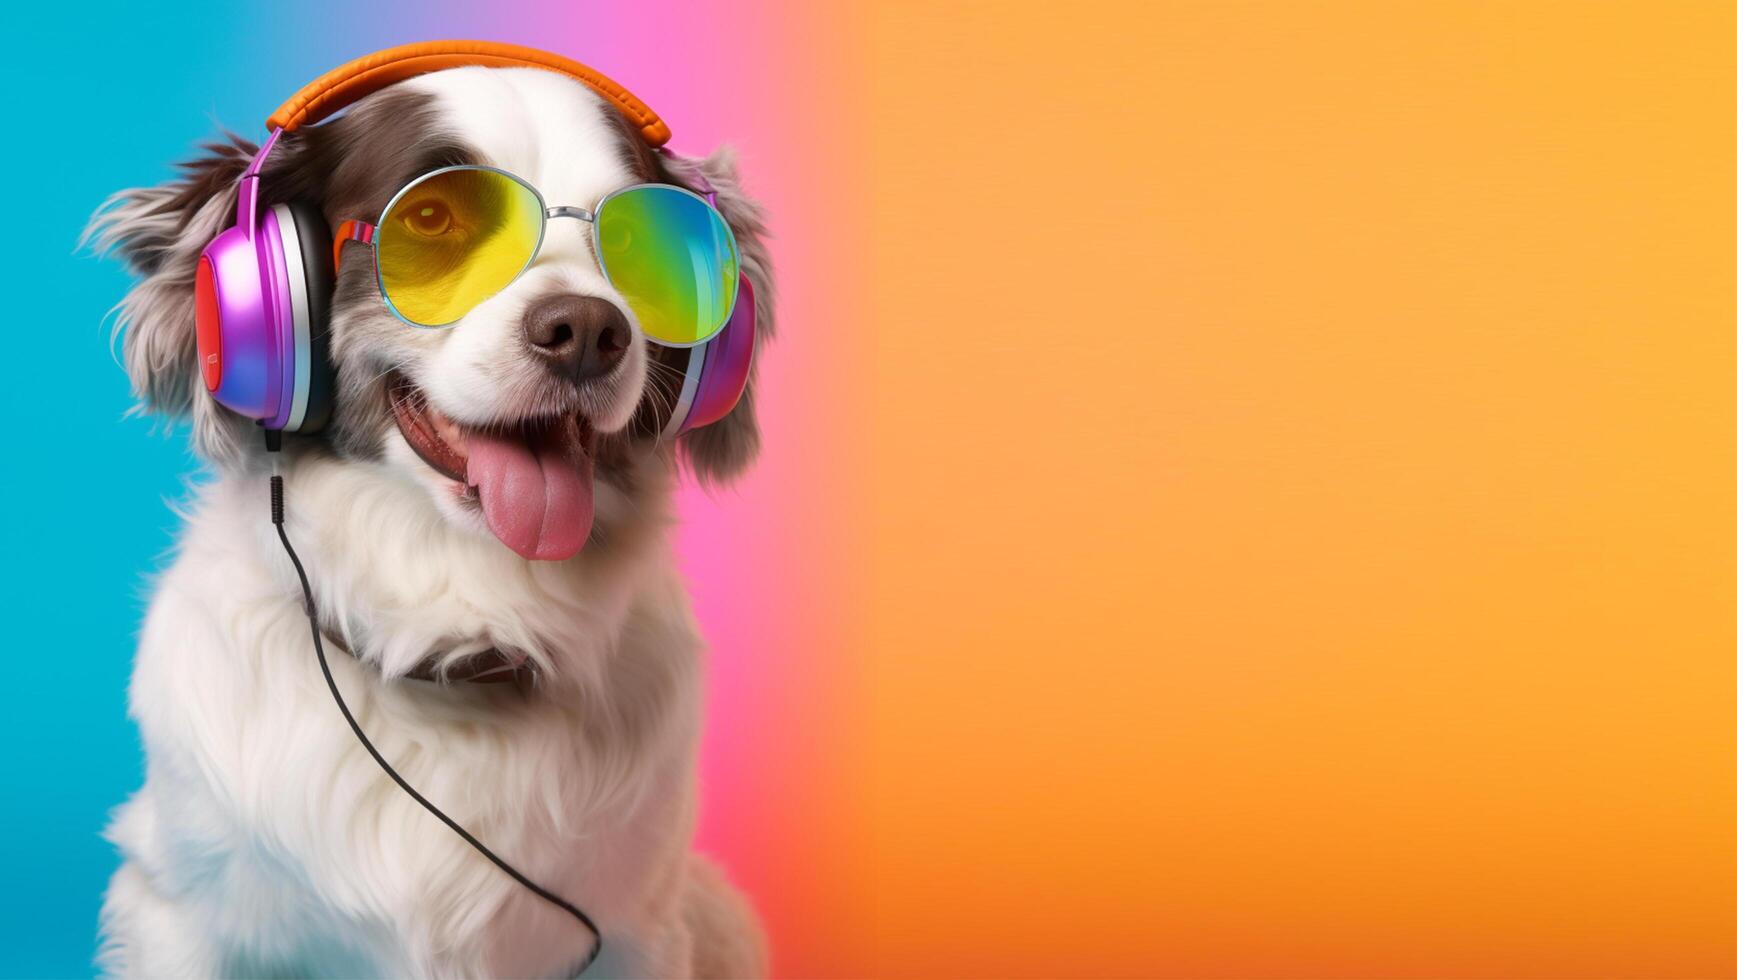 close up portrait of dog wearing glasses and headset. isolated on colorful background, with copyspace. Cheerful concept with listening to music. photo